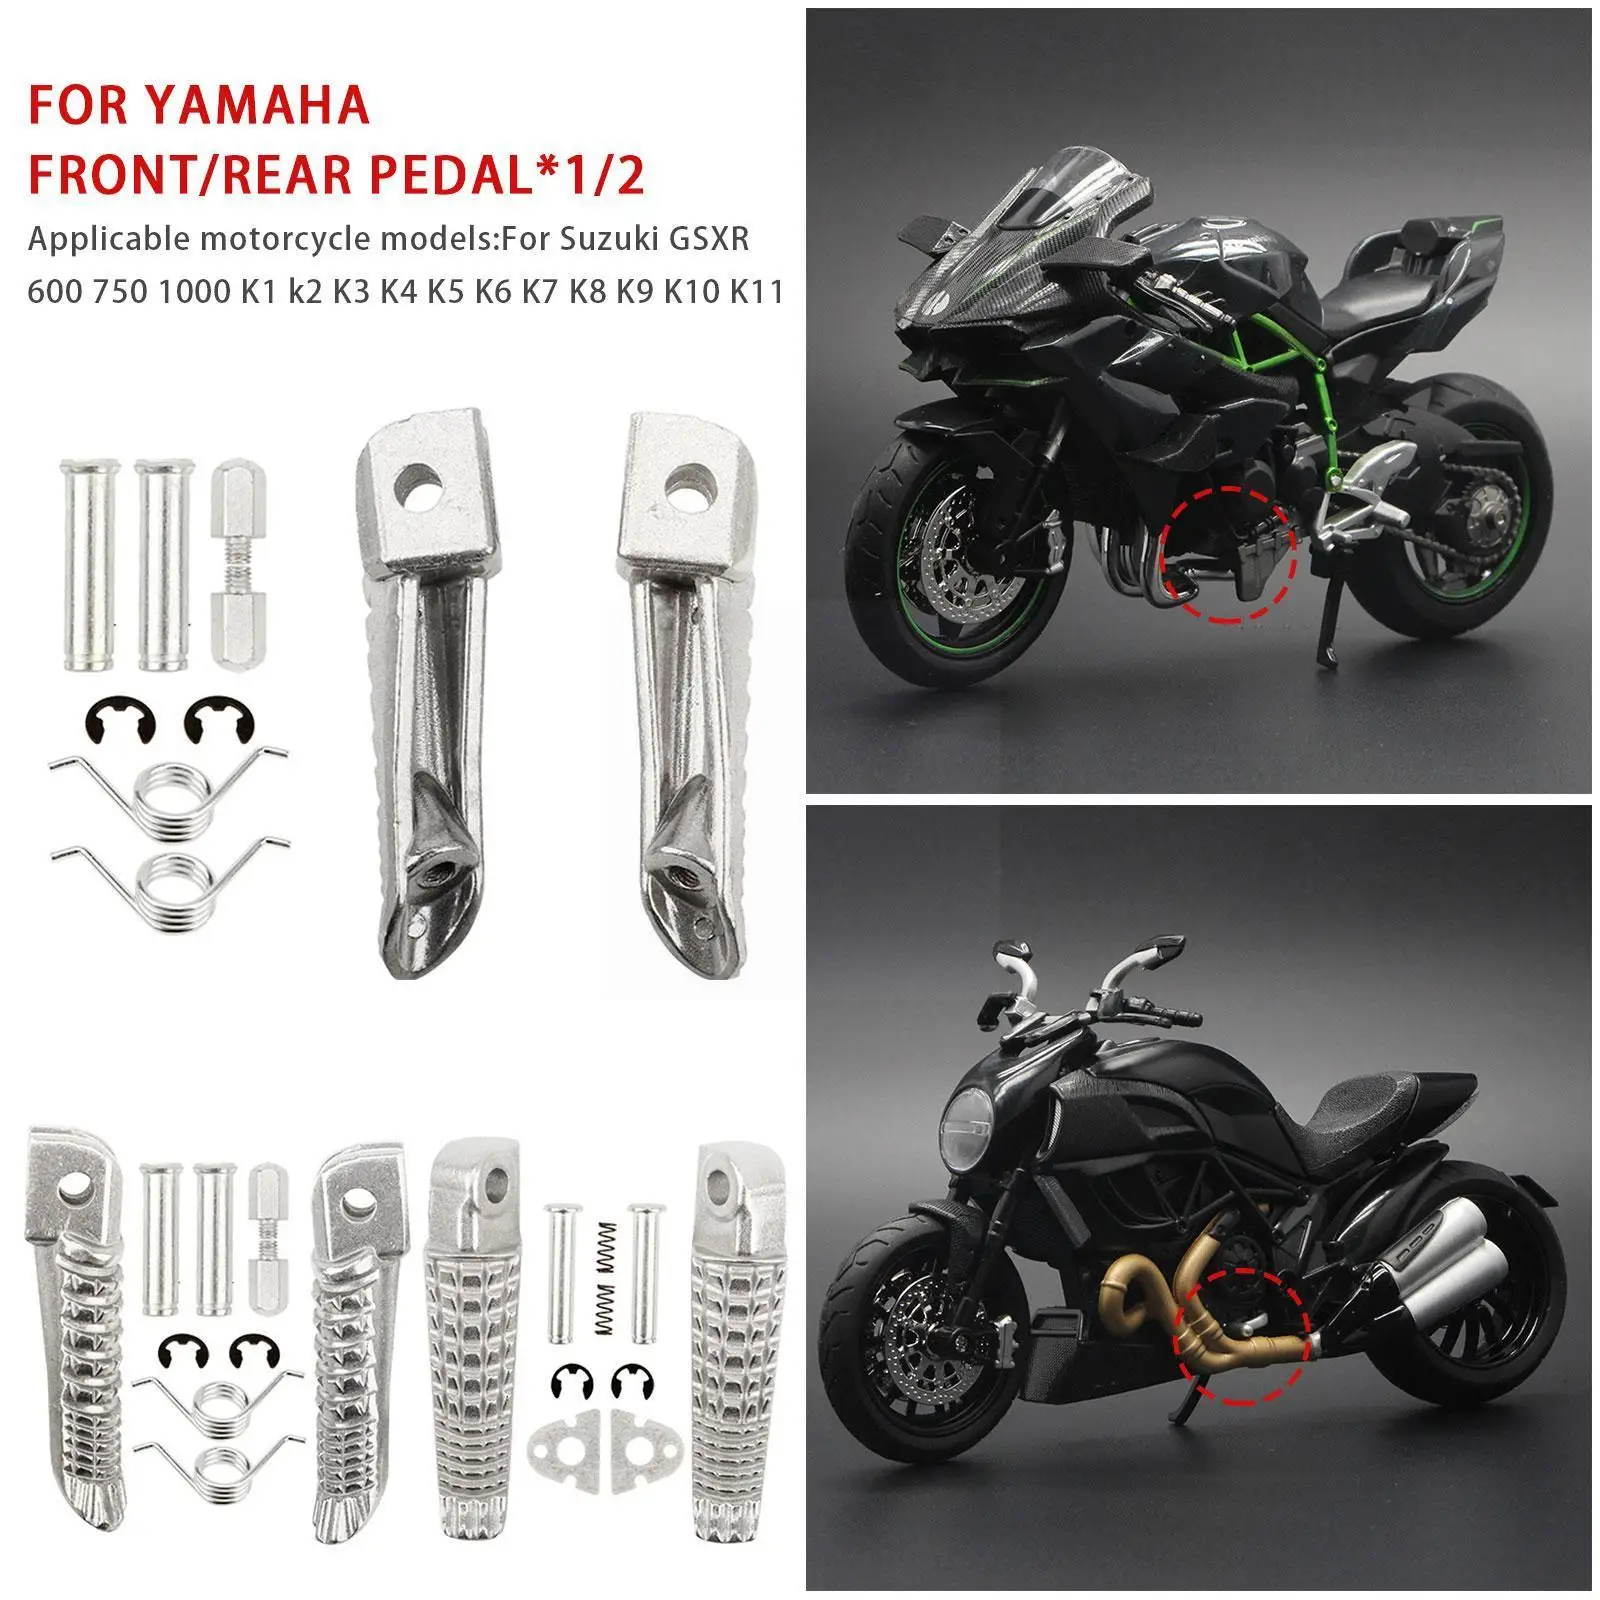 

Motorcycle Rear Foot Pegs Rests Passenger Footrests For for SUZUKI 600 750 1000 K1 k2 K3 K4 K5 K6 K7 K8 K9 K10 K11 I9Q9